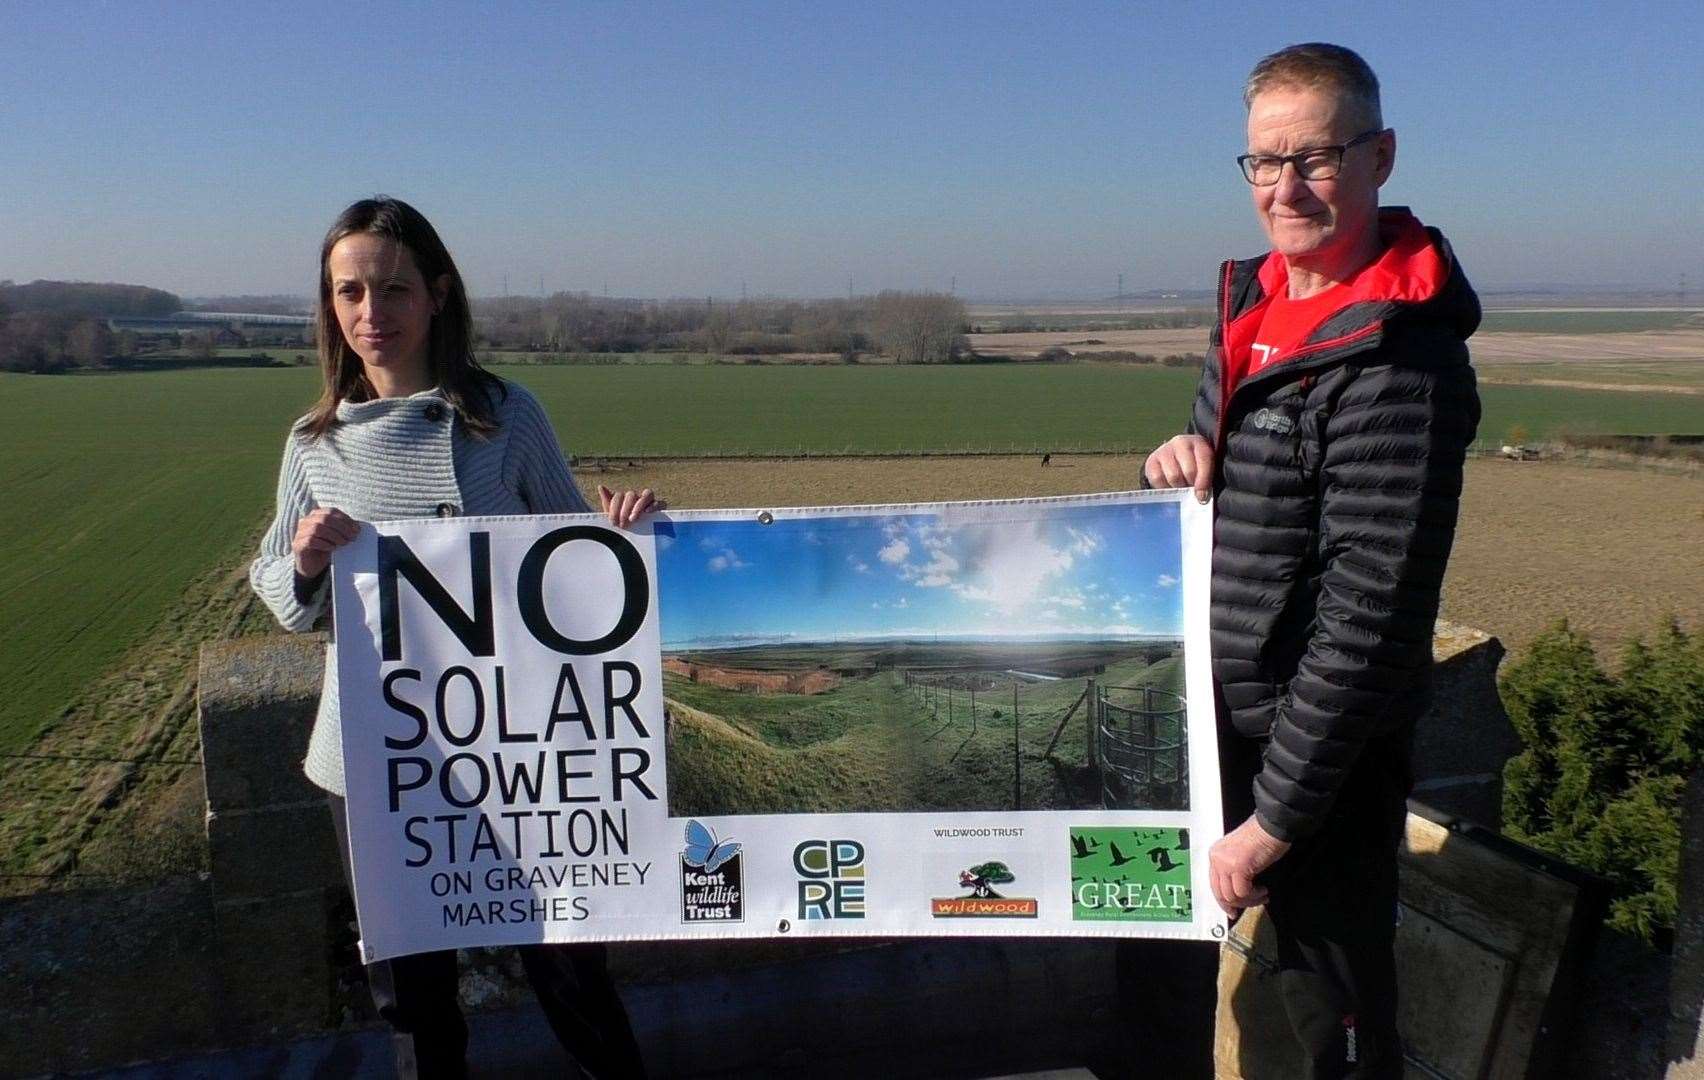 MP Helen Whately took part in the campaign opposing Cleve Hill Solar Park before it was approved